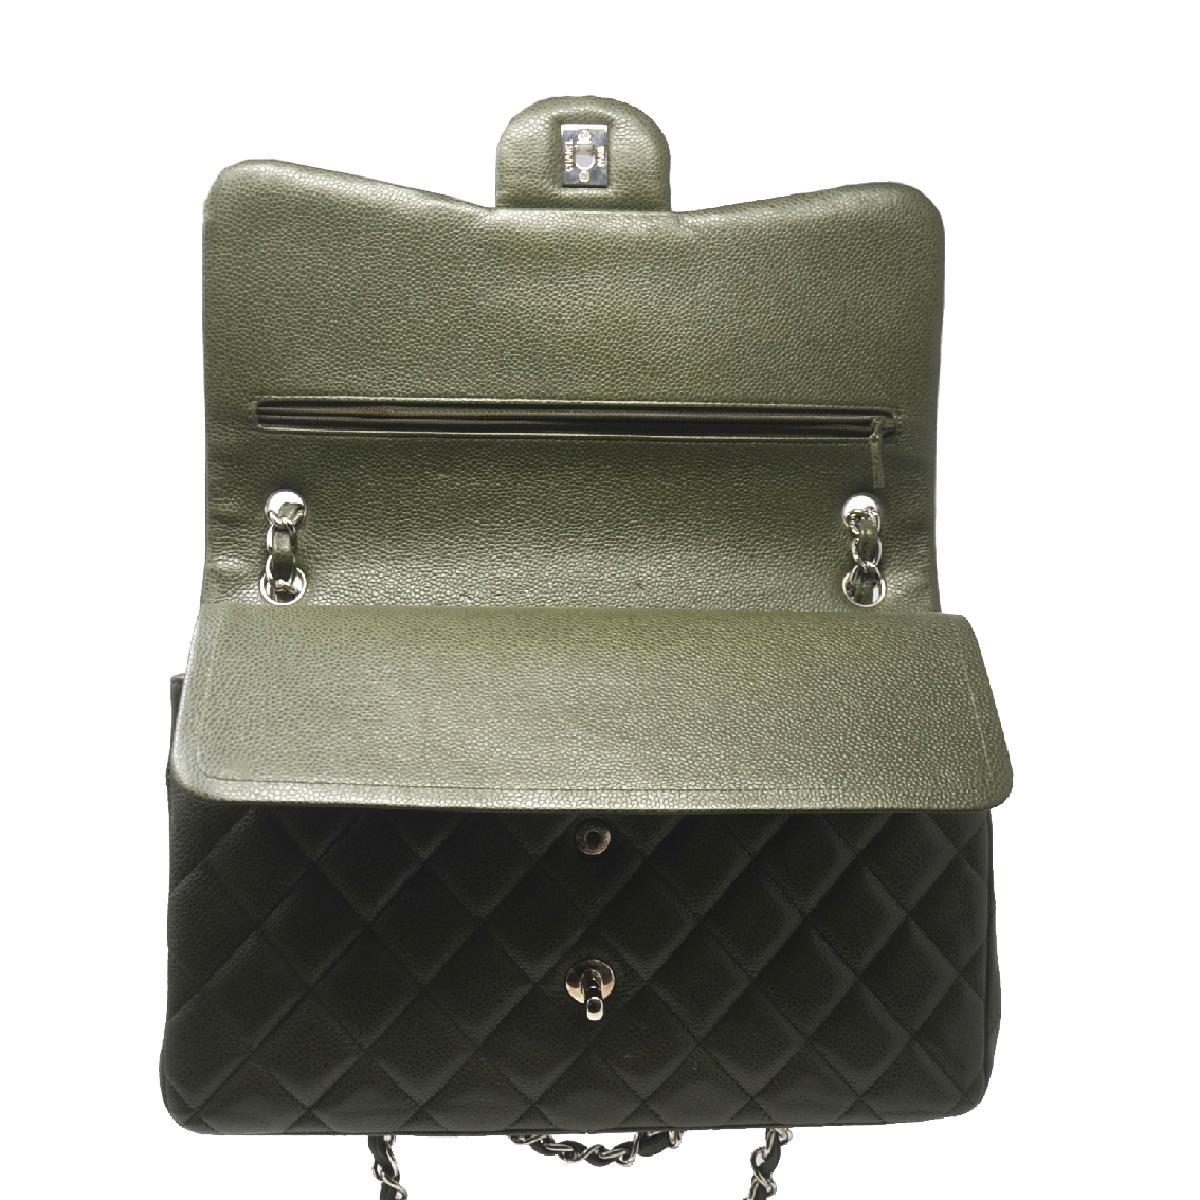  Chanel Olive Green Jumbo Double Flap Shoulder Bag With Card   4